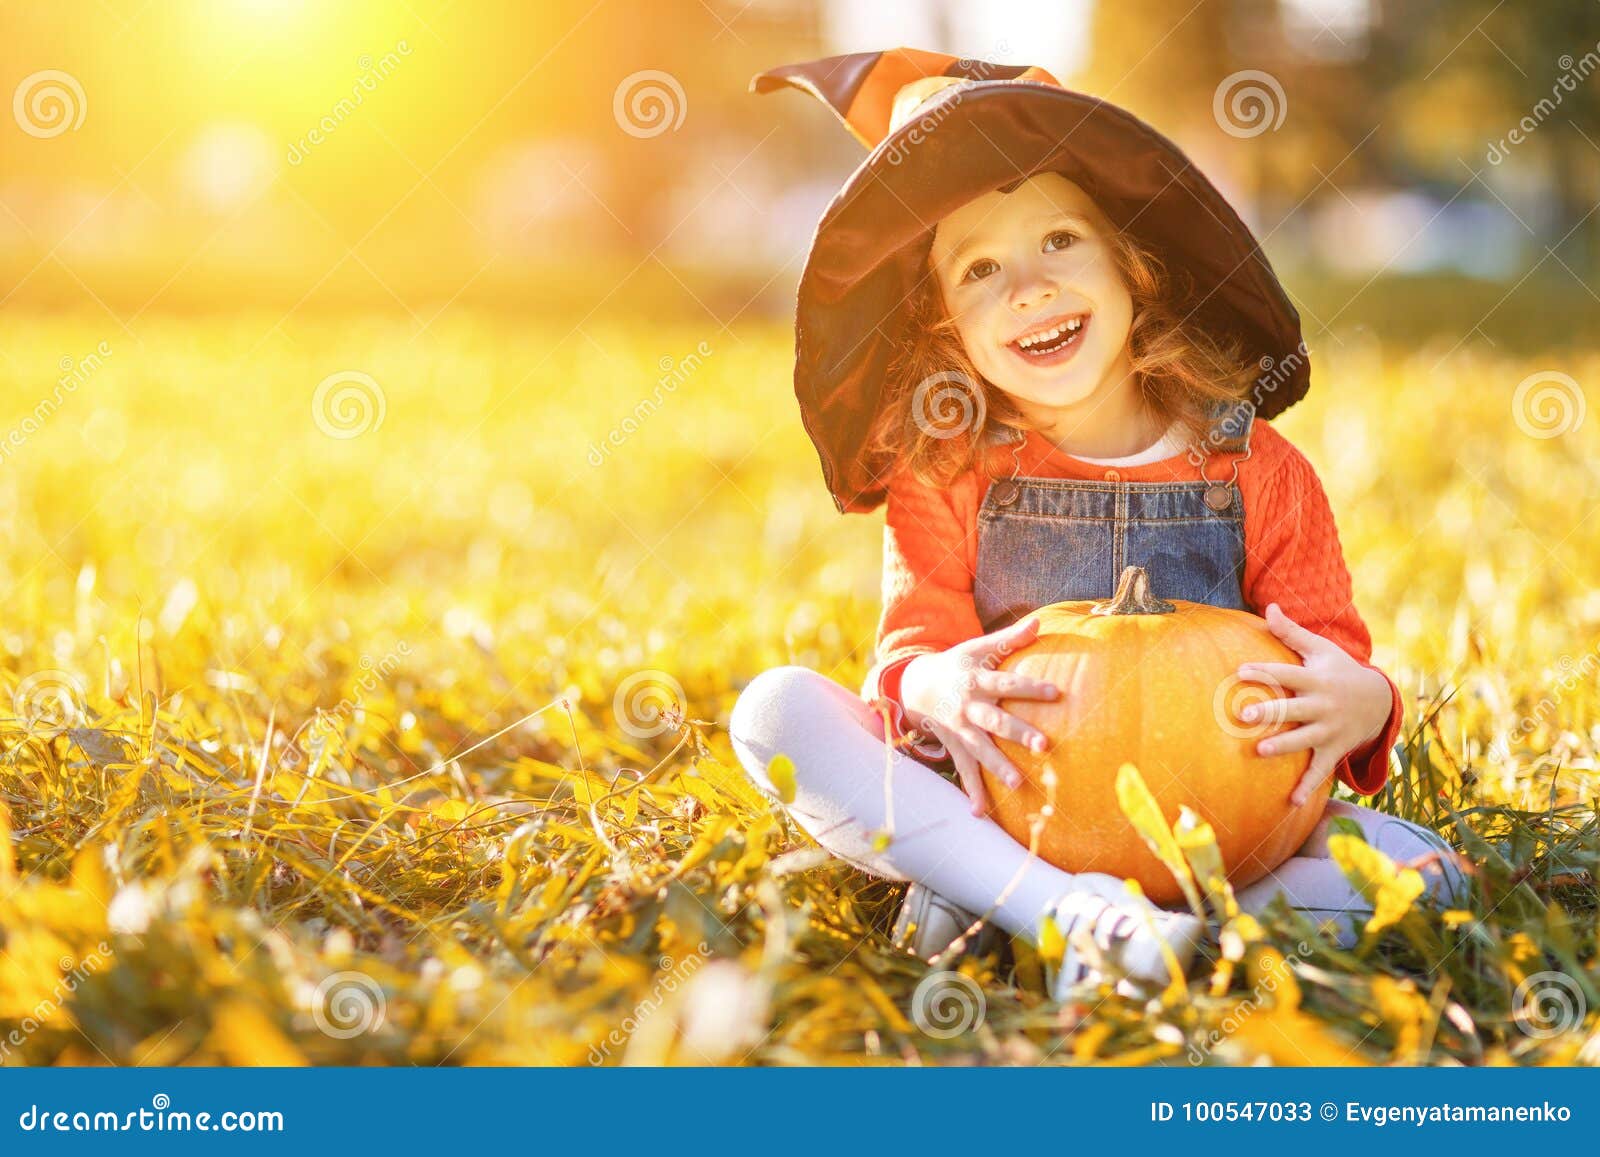 Child Girl with Pumpkin Outdoors in Halloween Stock Image - Image of ...